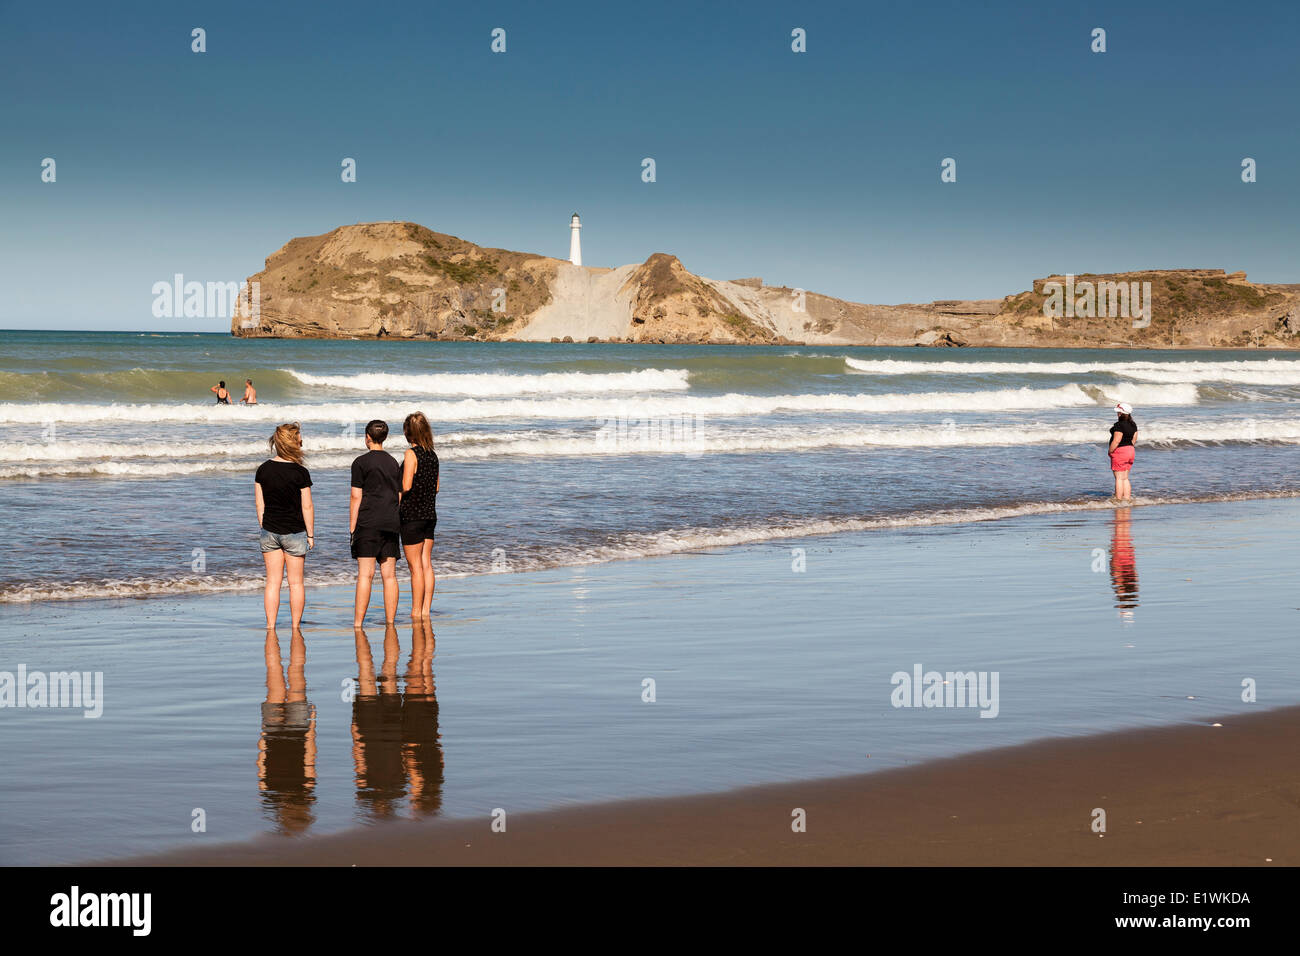 People enjoying the surf at Castlepoint New Zealand on the South Pacific Ocean Stock Photo